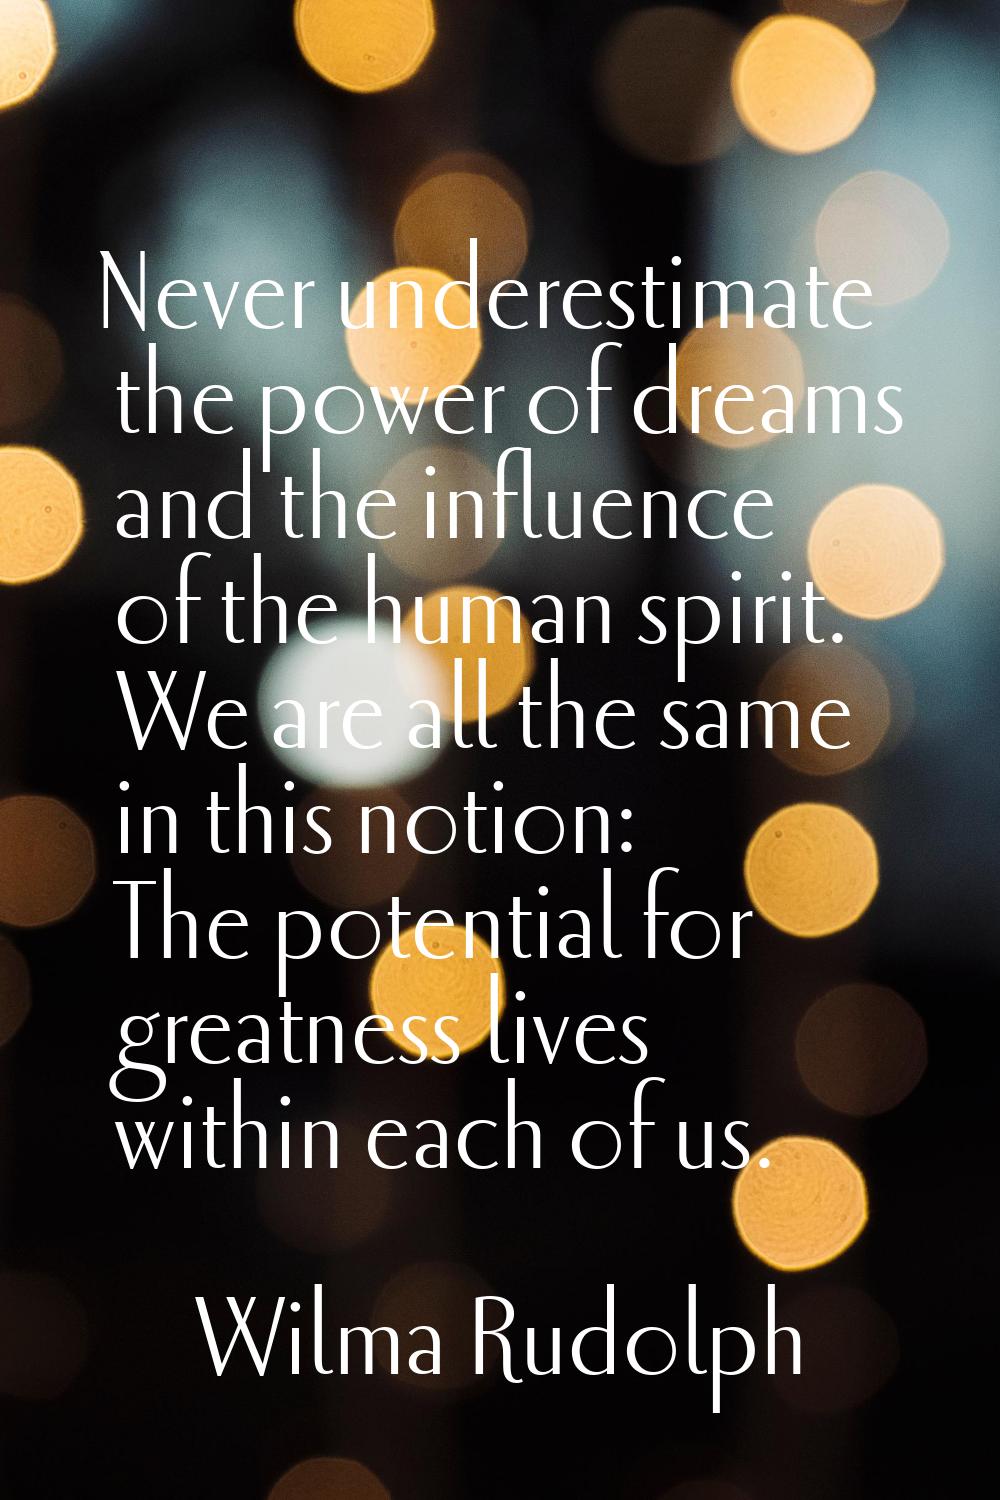 Never underestimate the power of dreams and the influence of the human spirit. We are all the same 